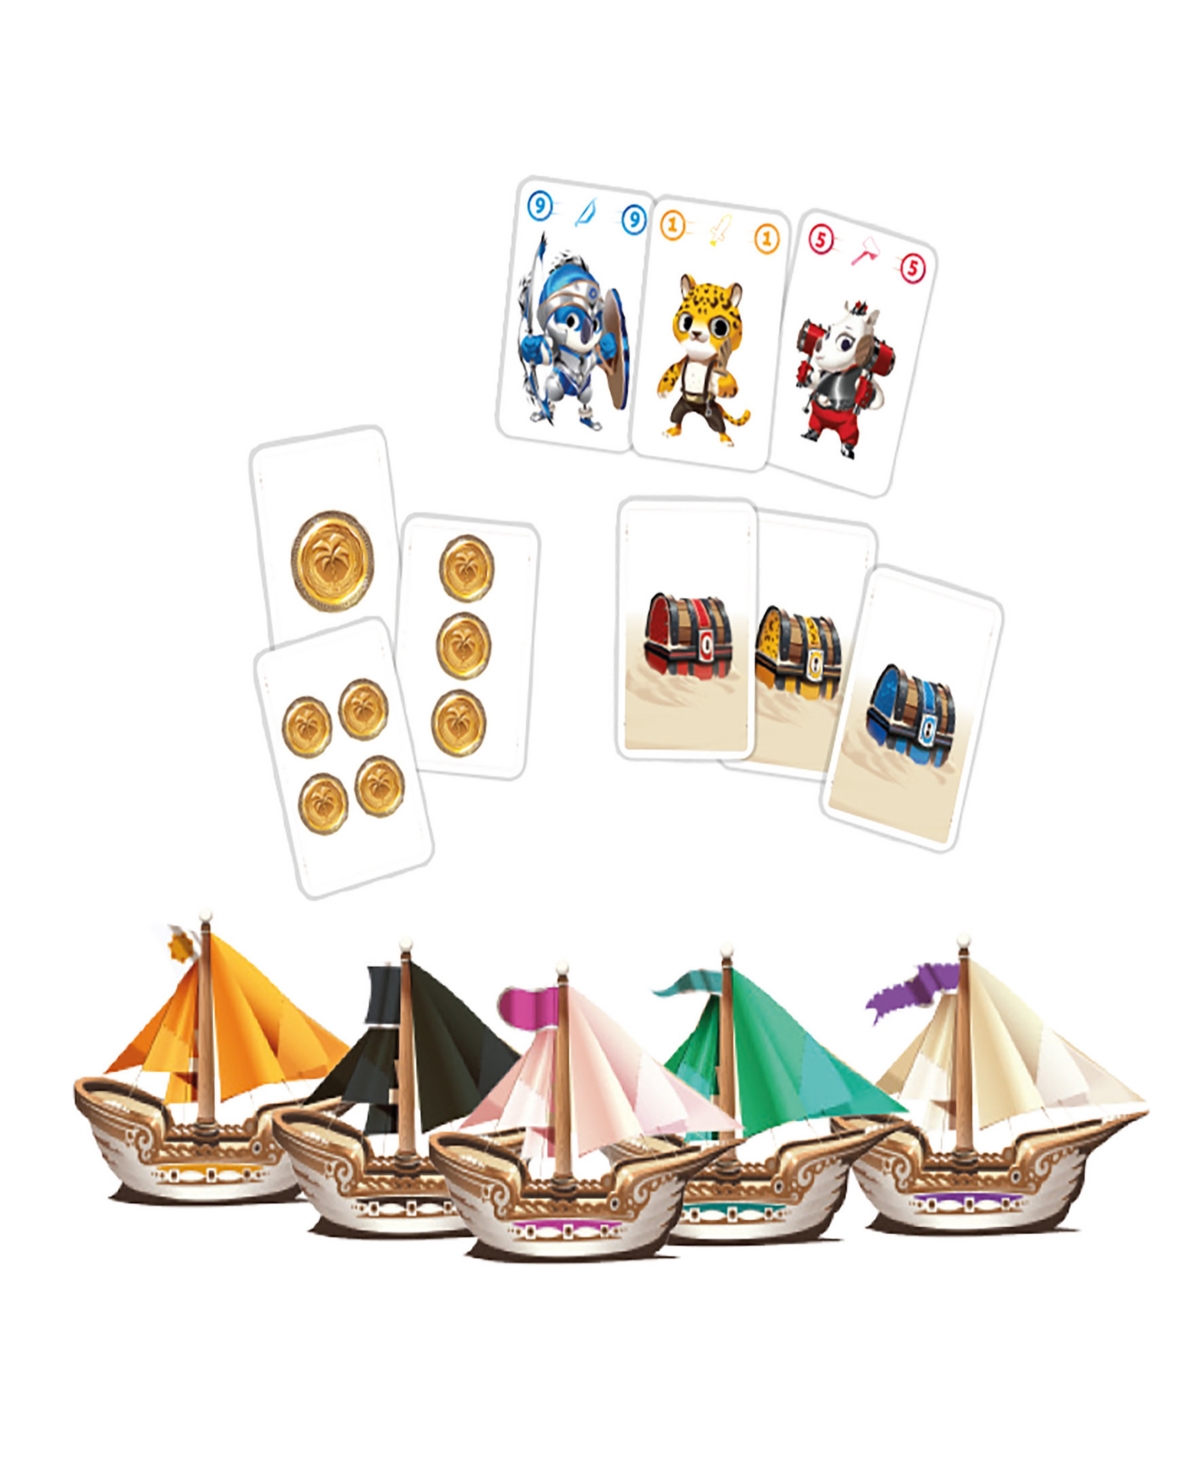 Shop Loki Little Battle Card Drafting Game For Kids And Family 27 Piece Set In Multi